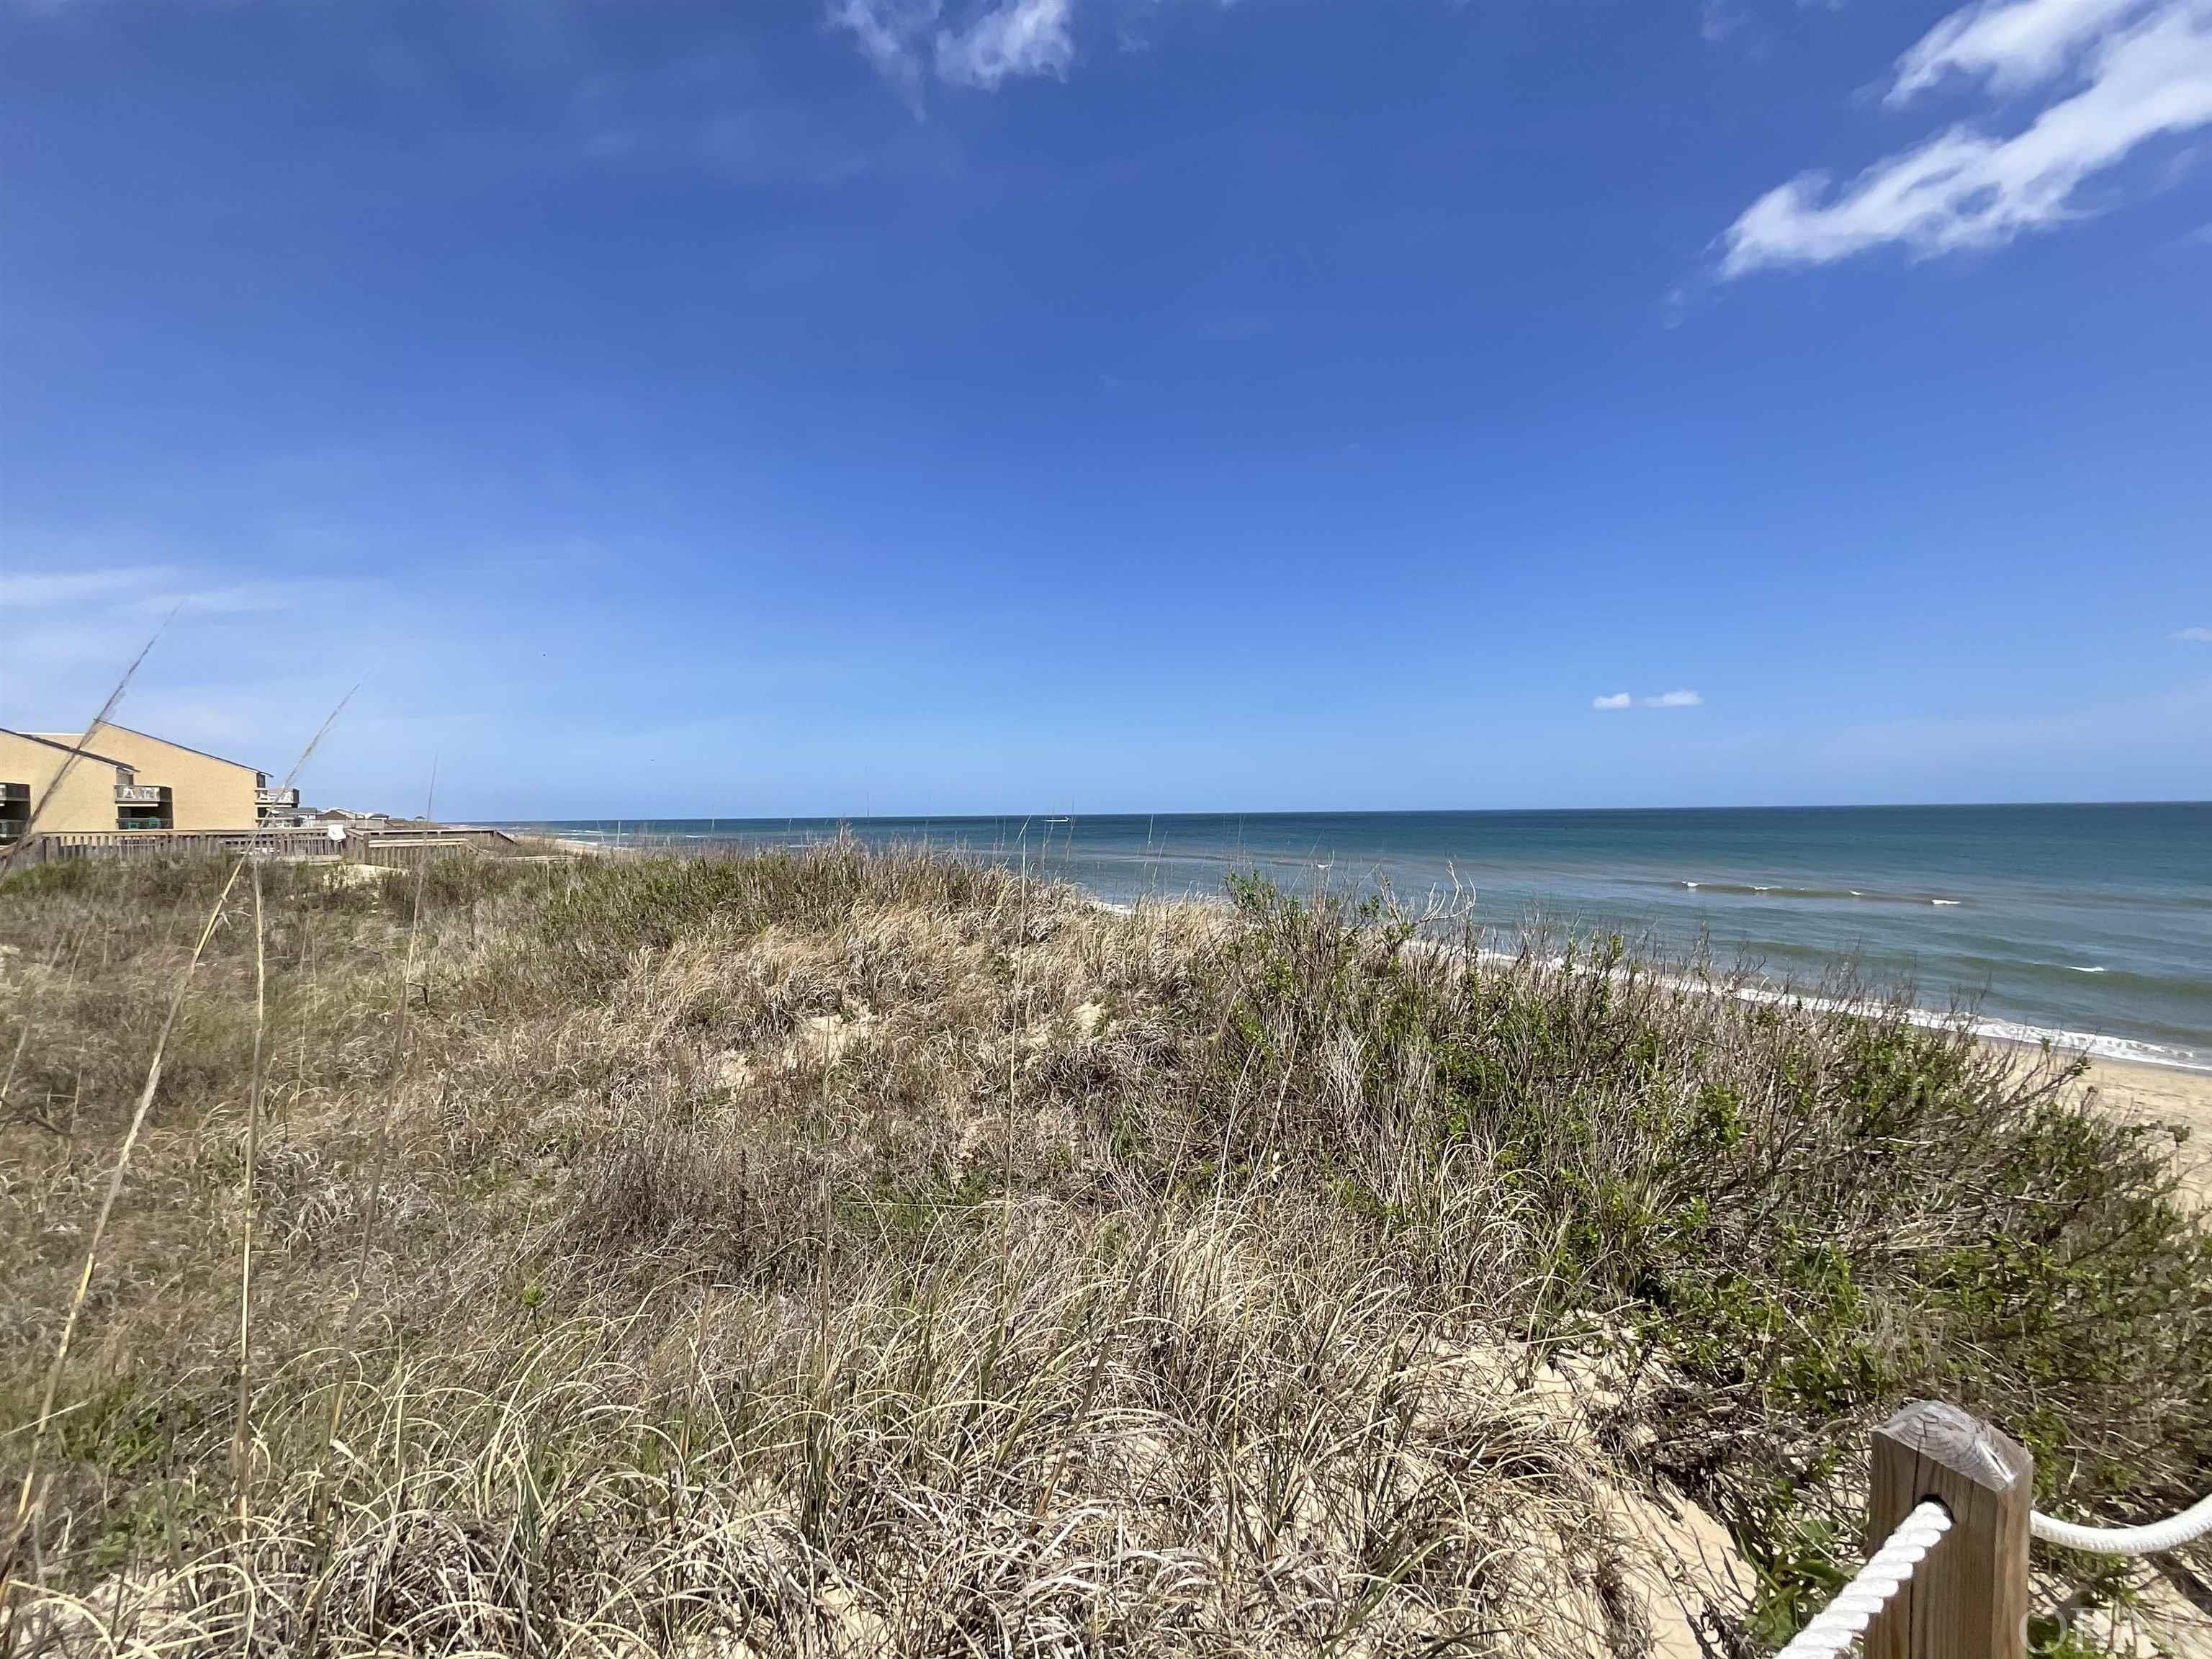 2303 Oneto Lane, Nags Head, NC 27959, 5 Bedrooms Bedrooms, ,5 BathroomsBathrooms,Residential,For sale,Oneto Lane,124842